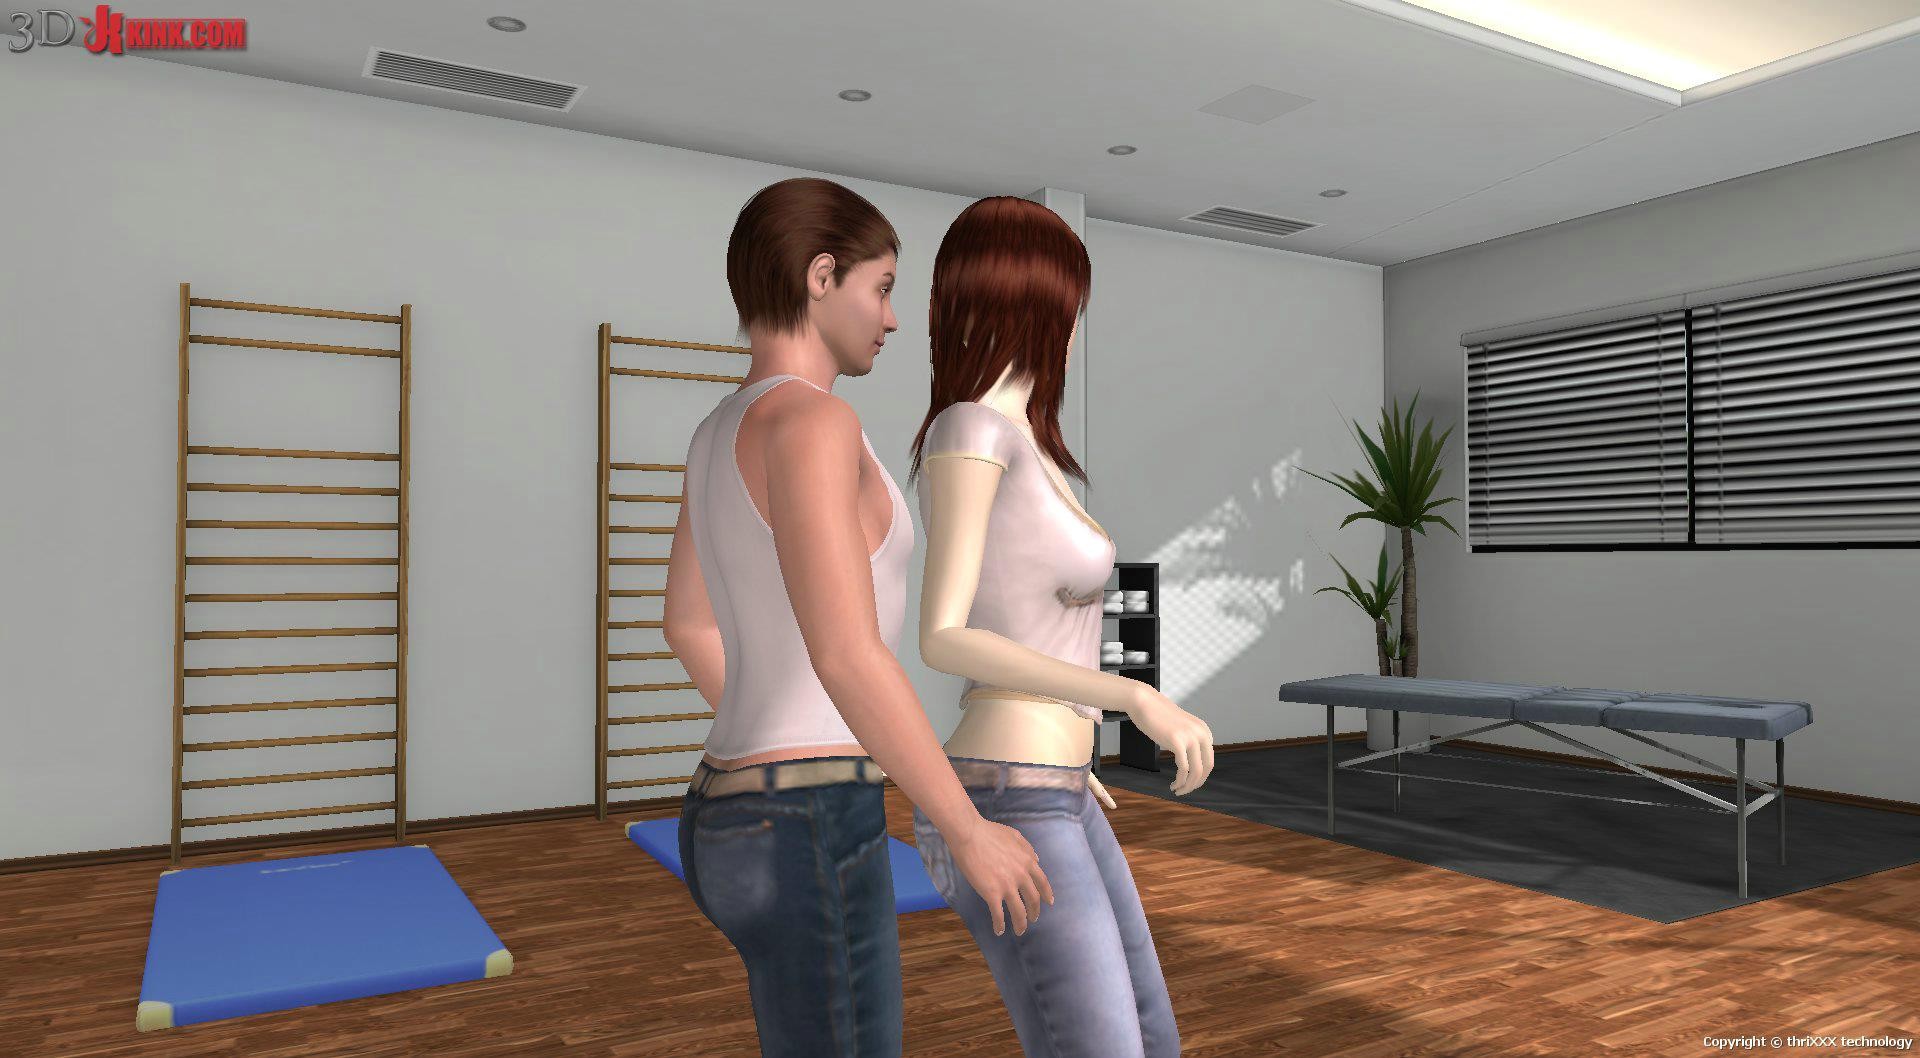 Hardcore sex in 3D created in virtual fetish 3d sex game!